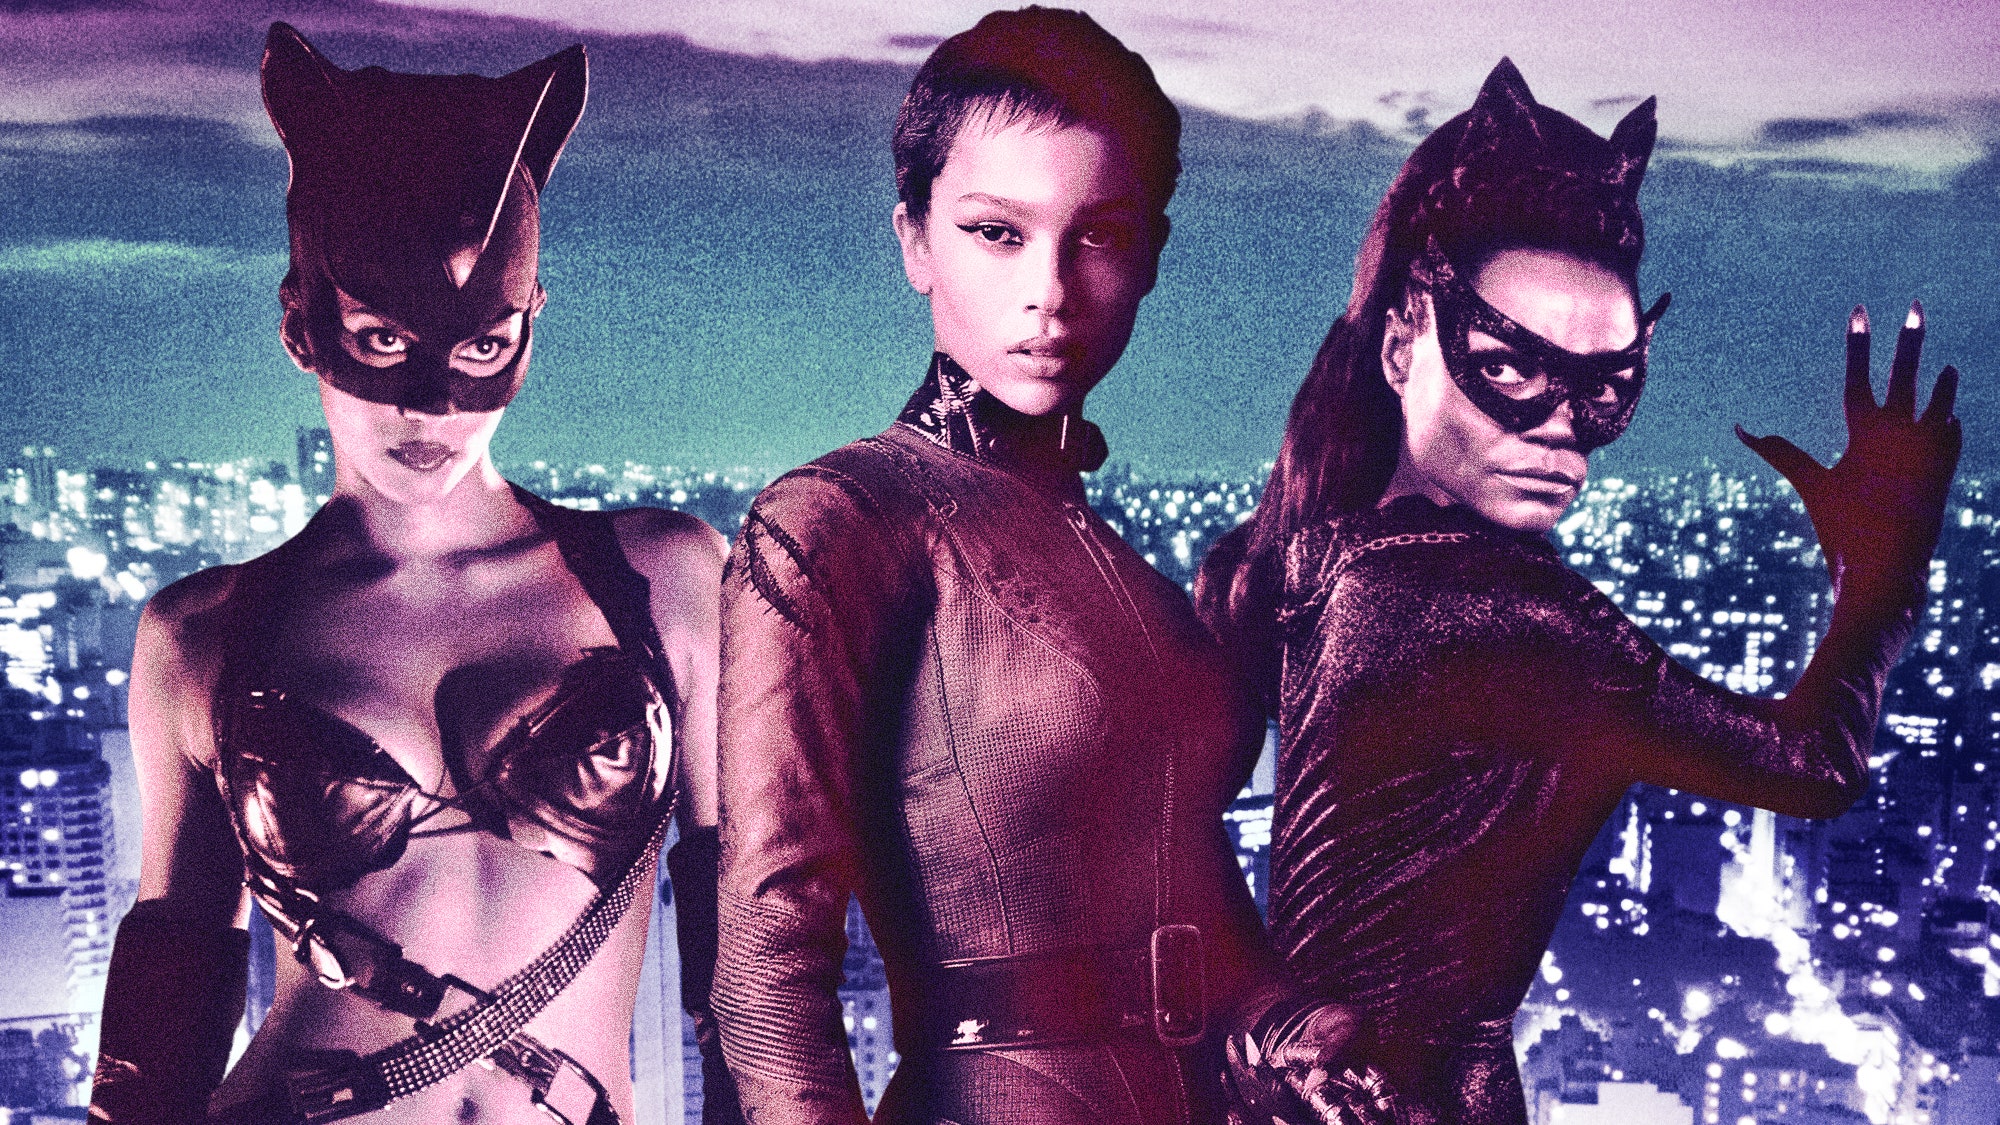 charles feucht recommends pictures of catwoman pic